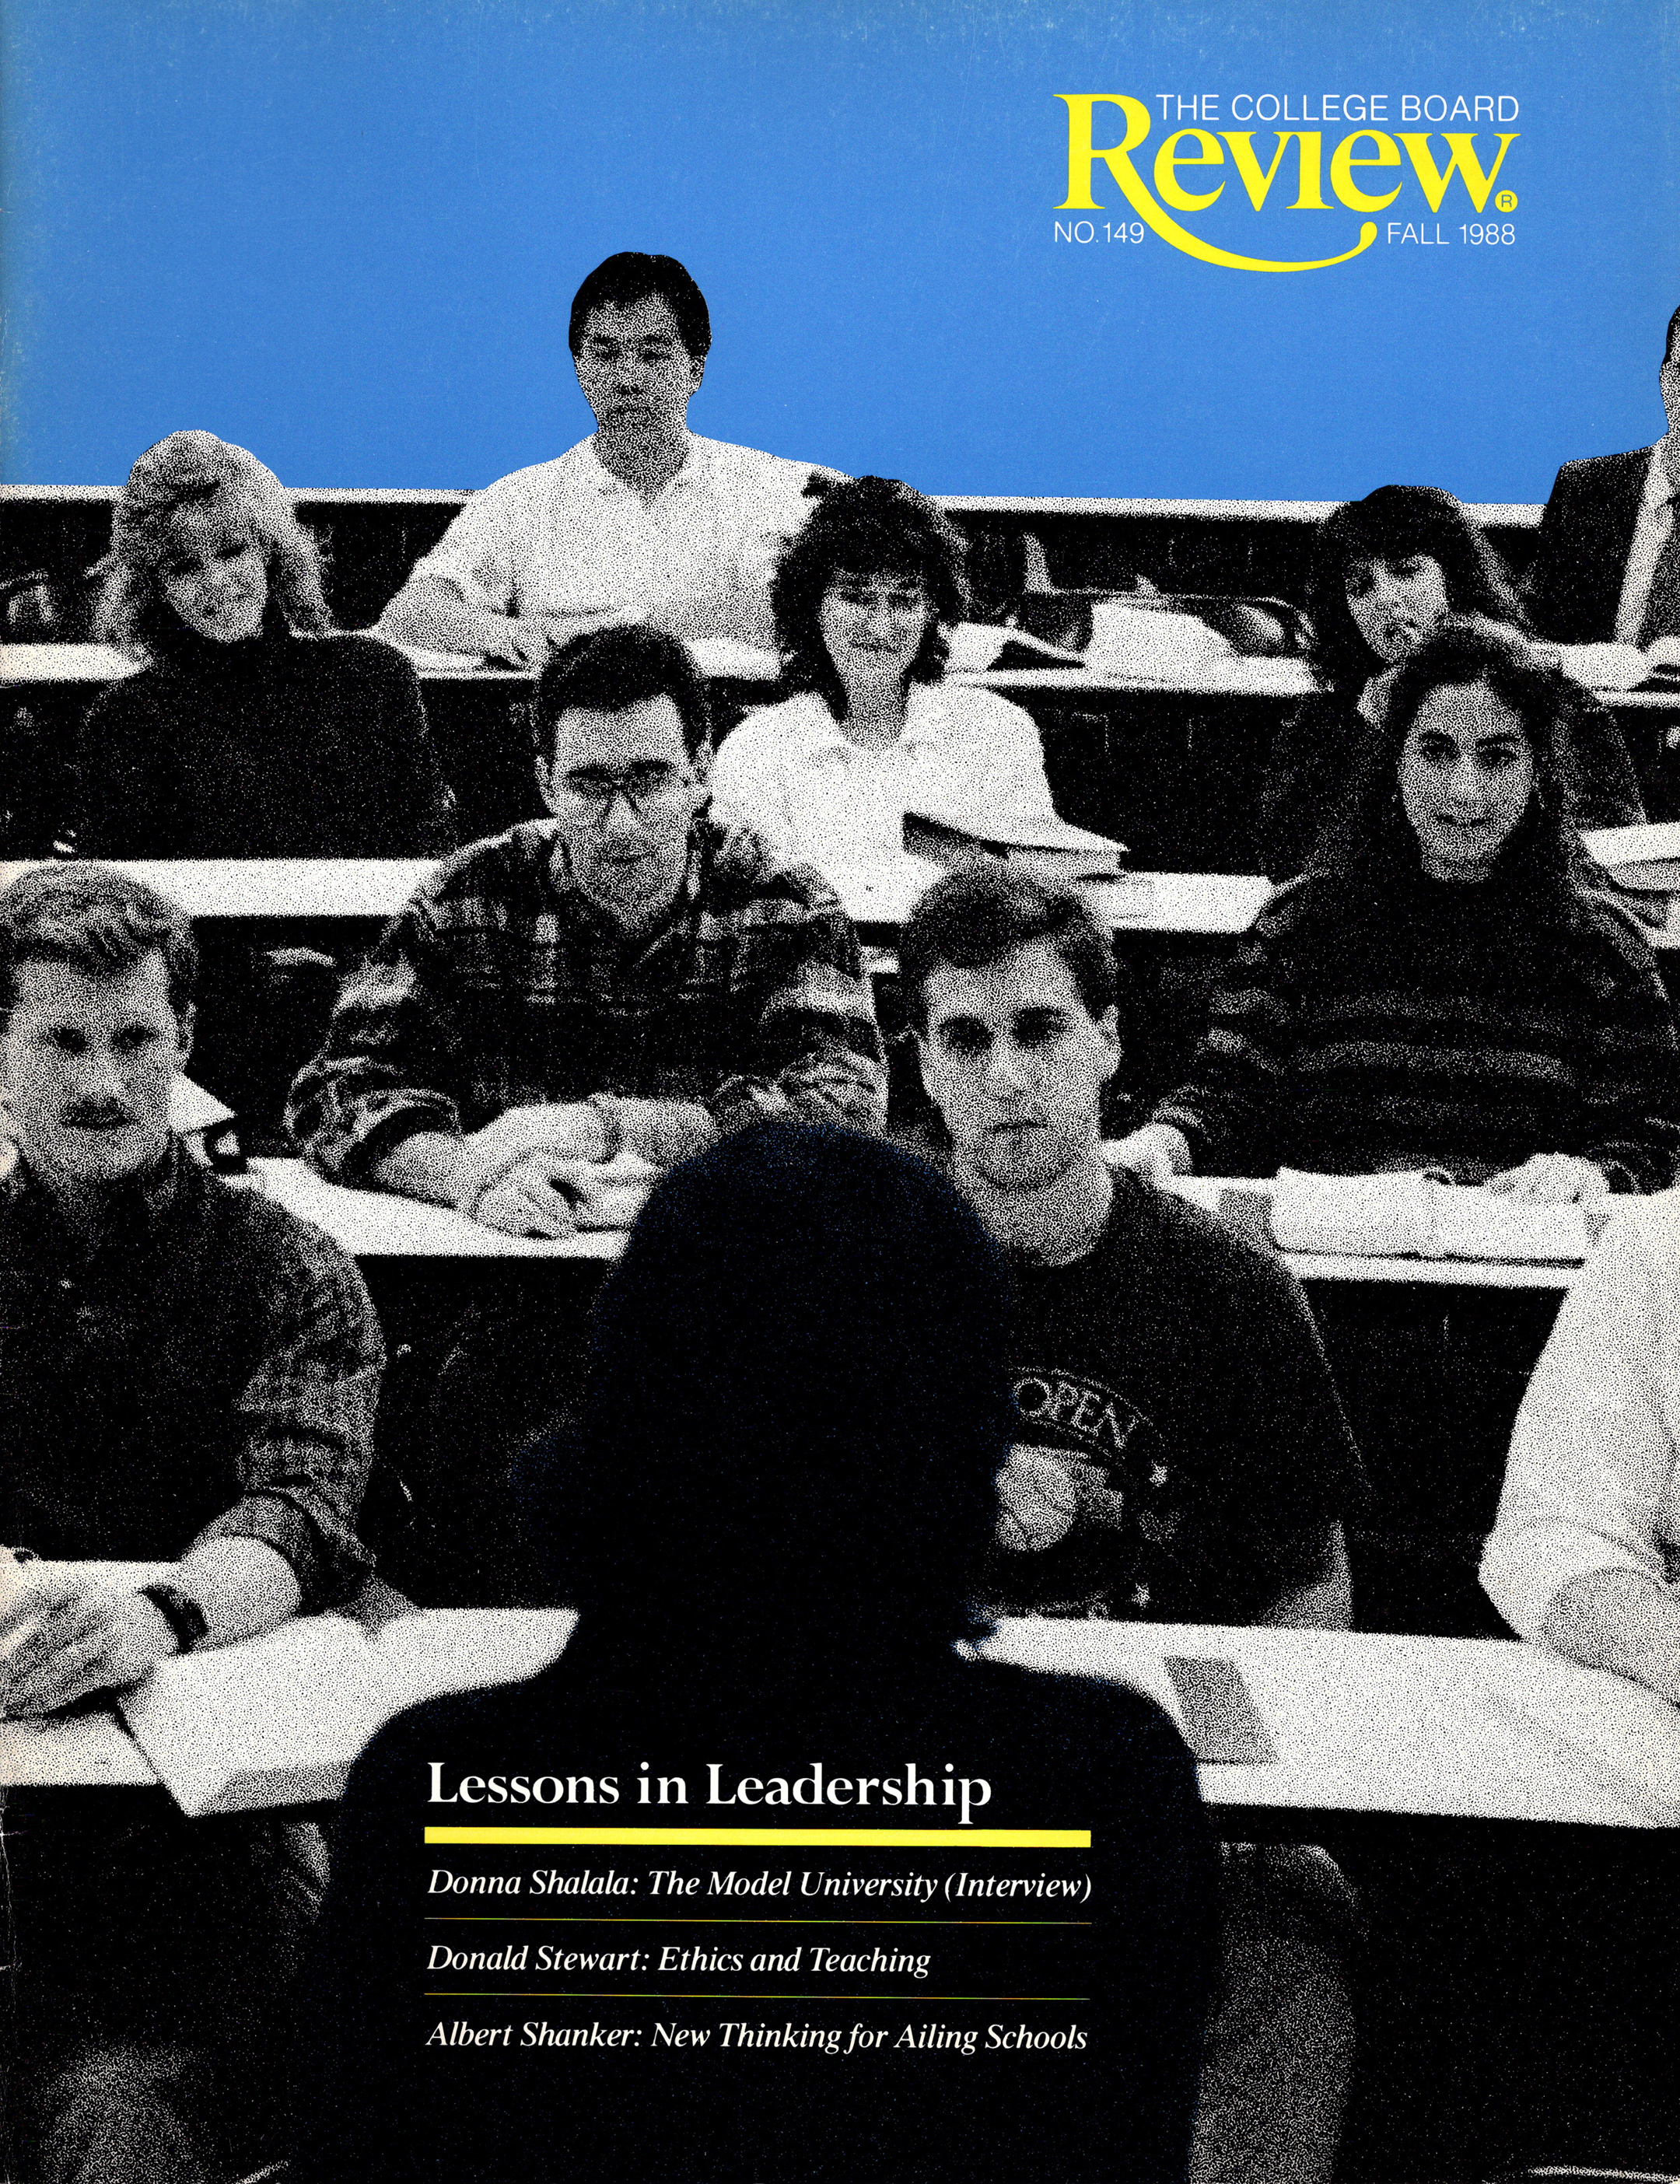 cover of the fall 1988 issue of the college board review showing a black and white photo of group of college students listening to a lecture